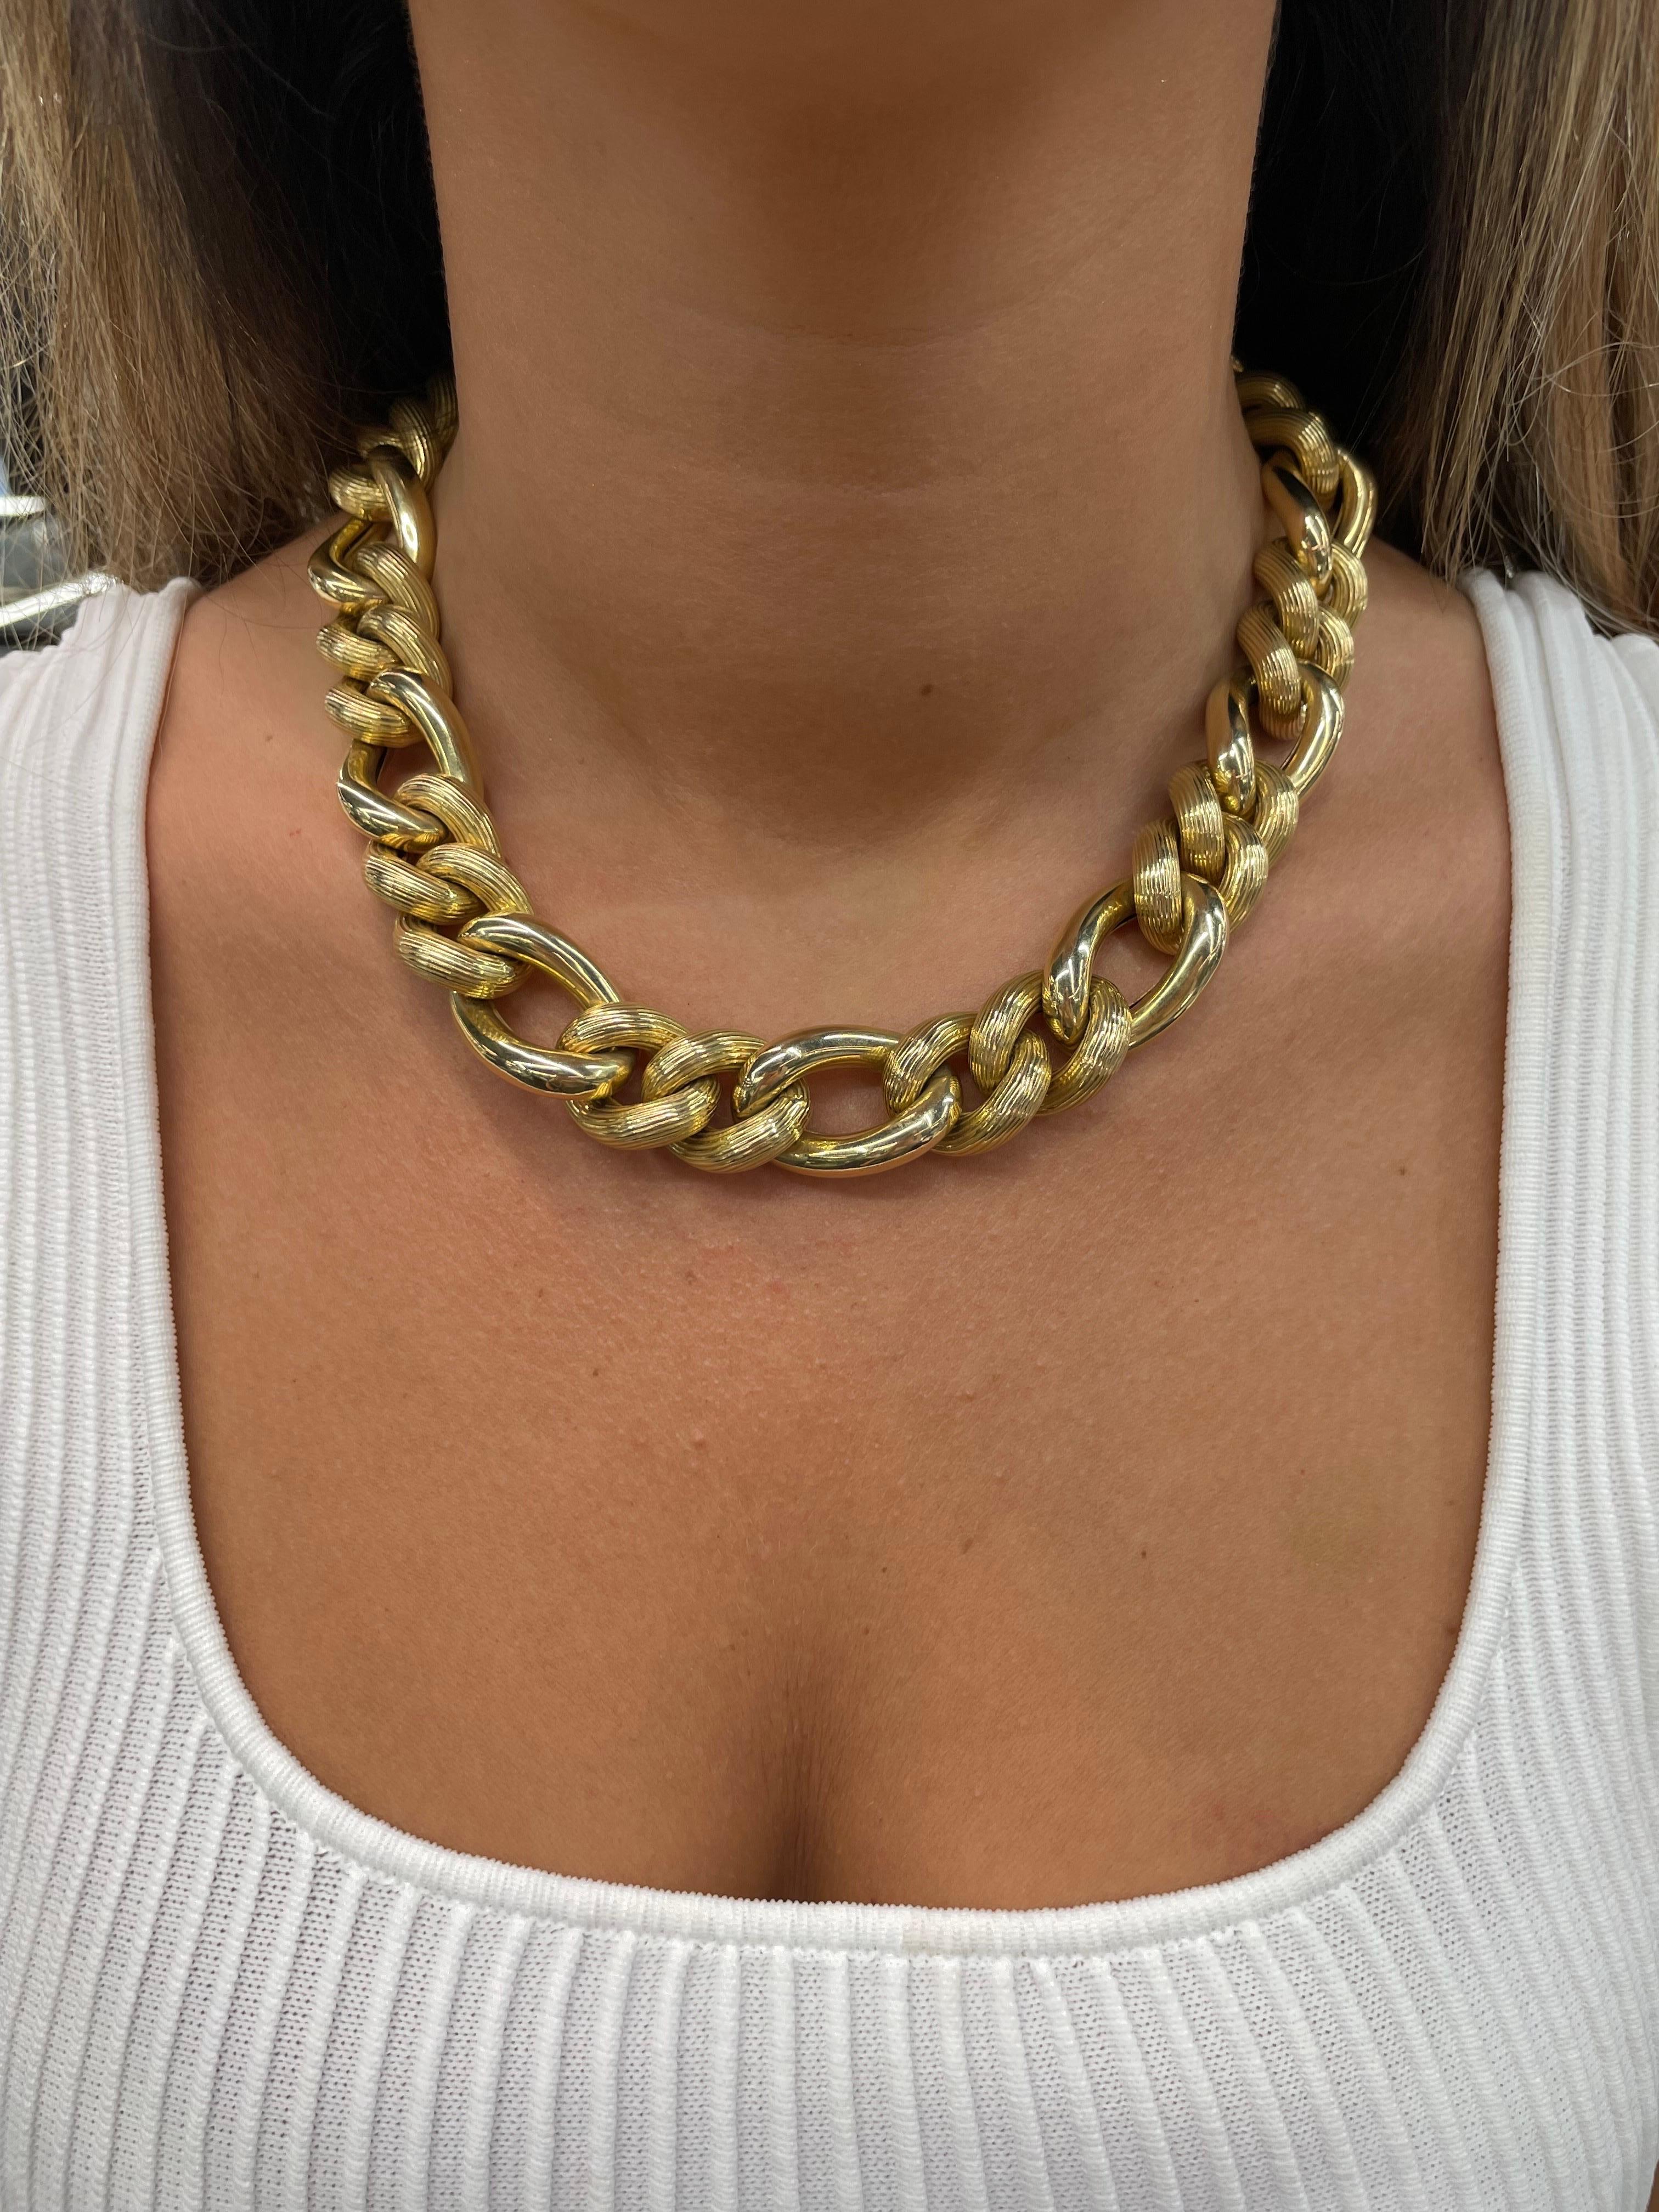 Contemporary 14 Karat Yellow Gold Large Figaro Link Necklace 139 Grams Made In Italy